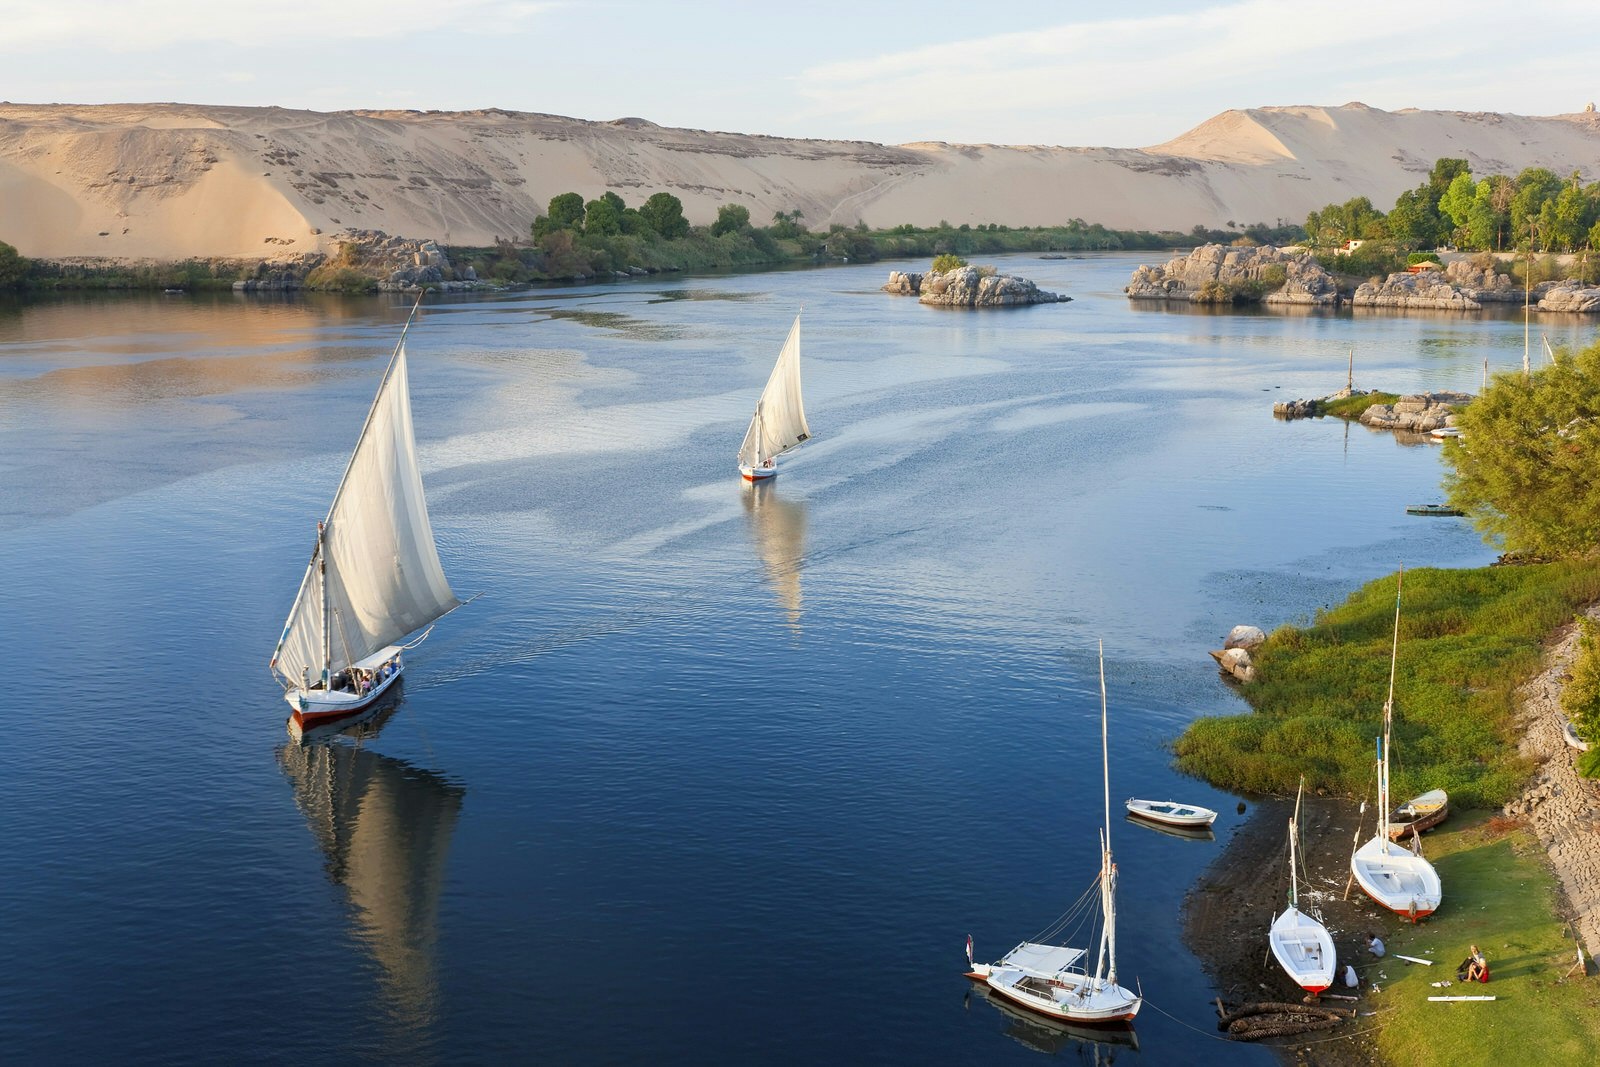 Felucca sailboats on the River Nile in Aswan, Egypt © Peter Adams / Getty Images